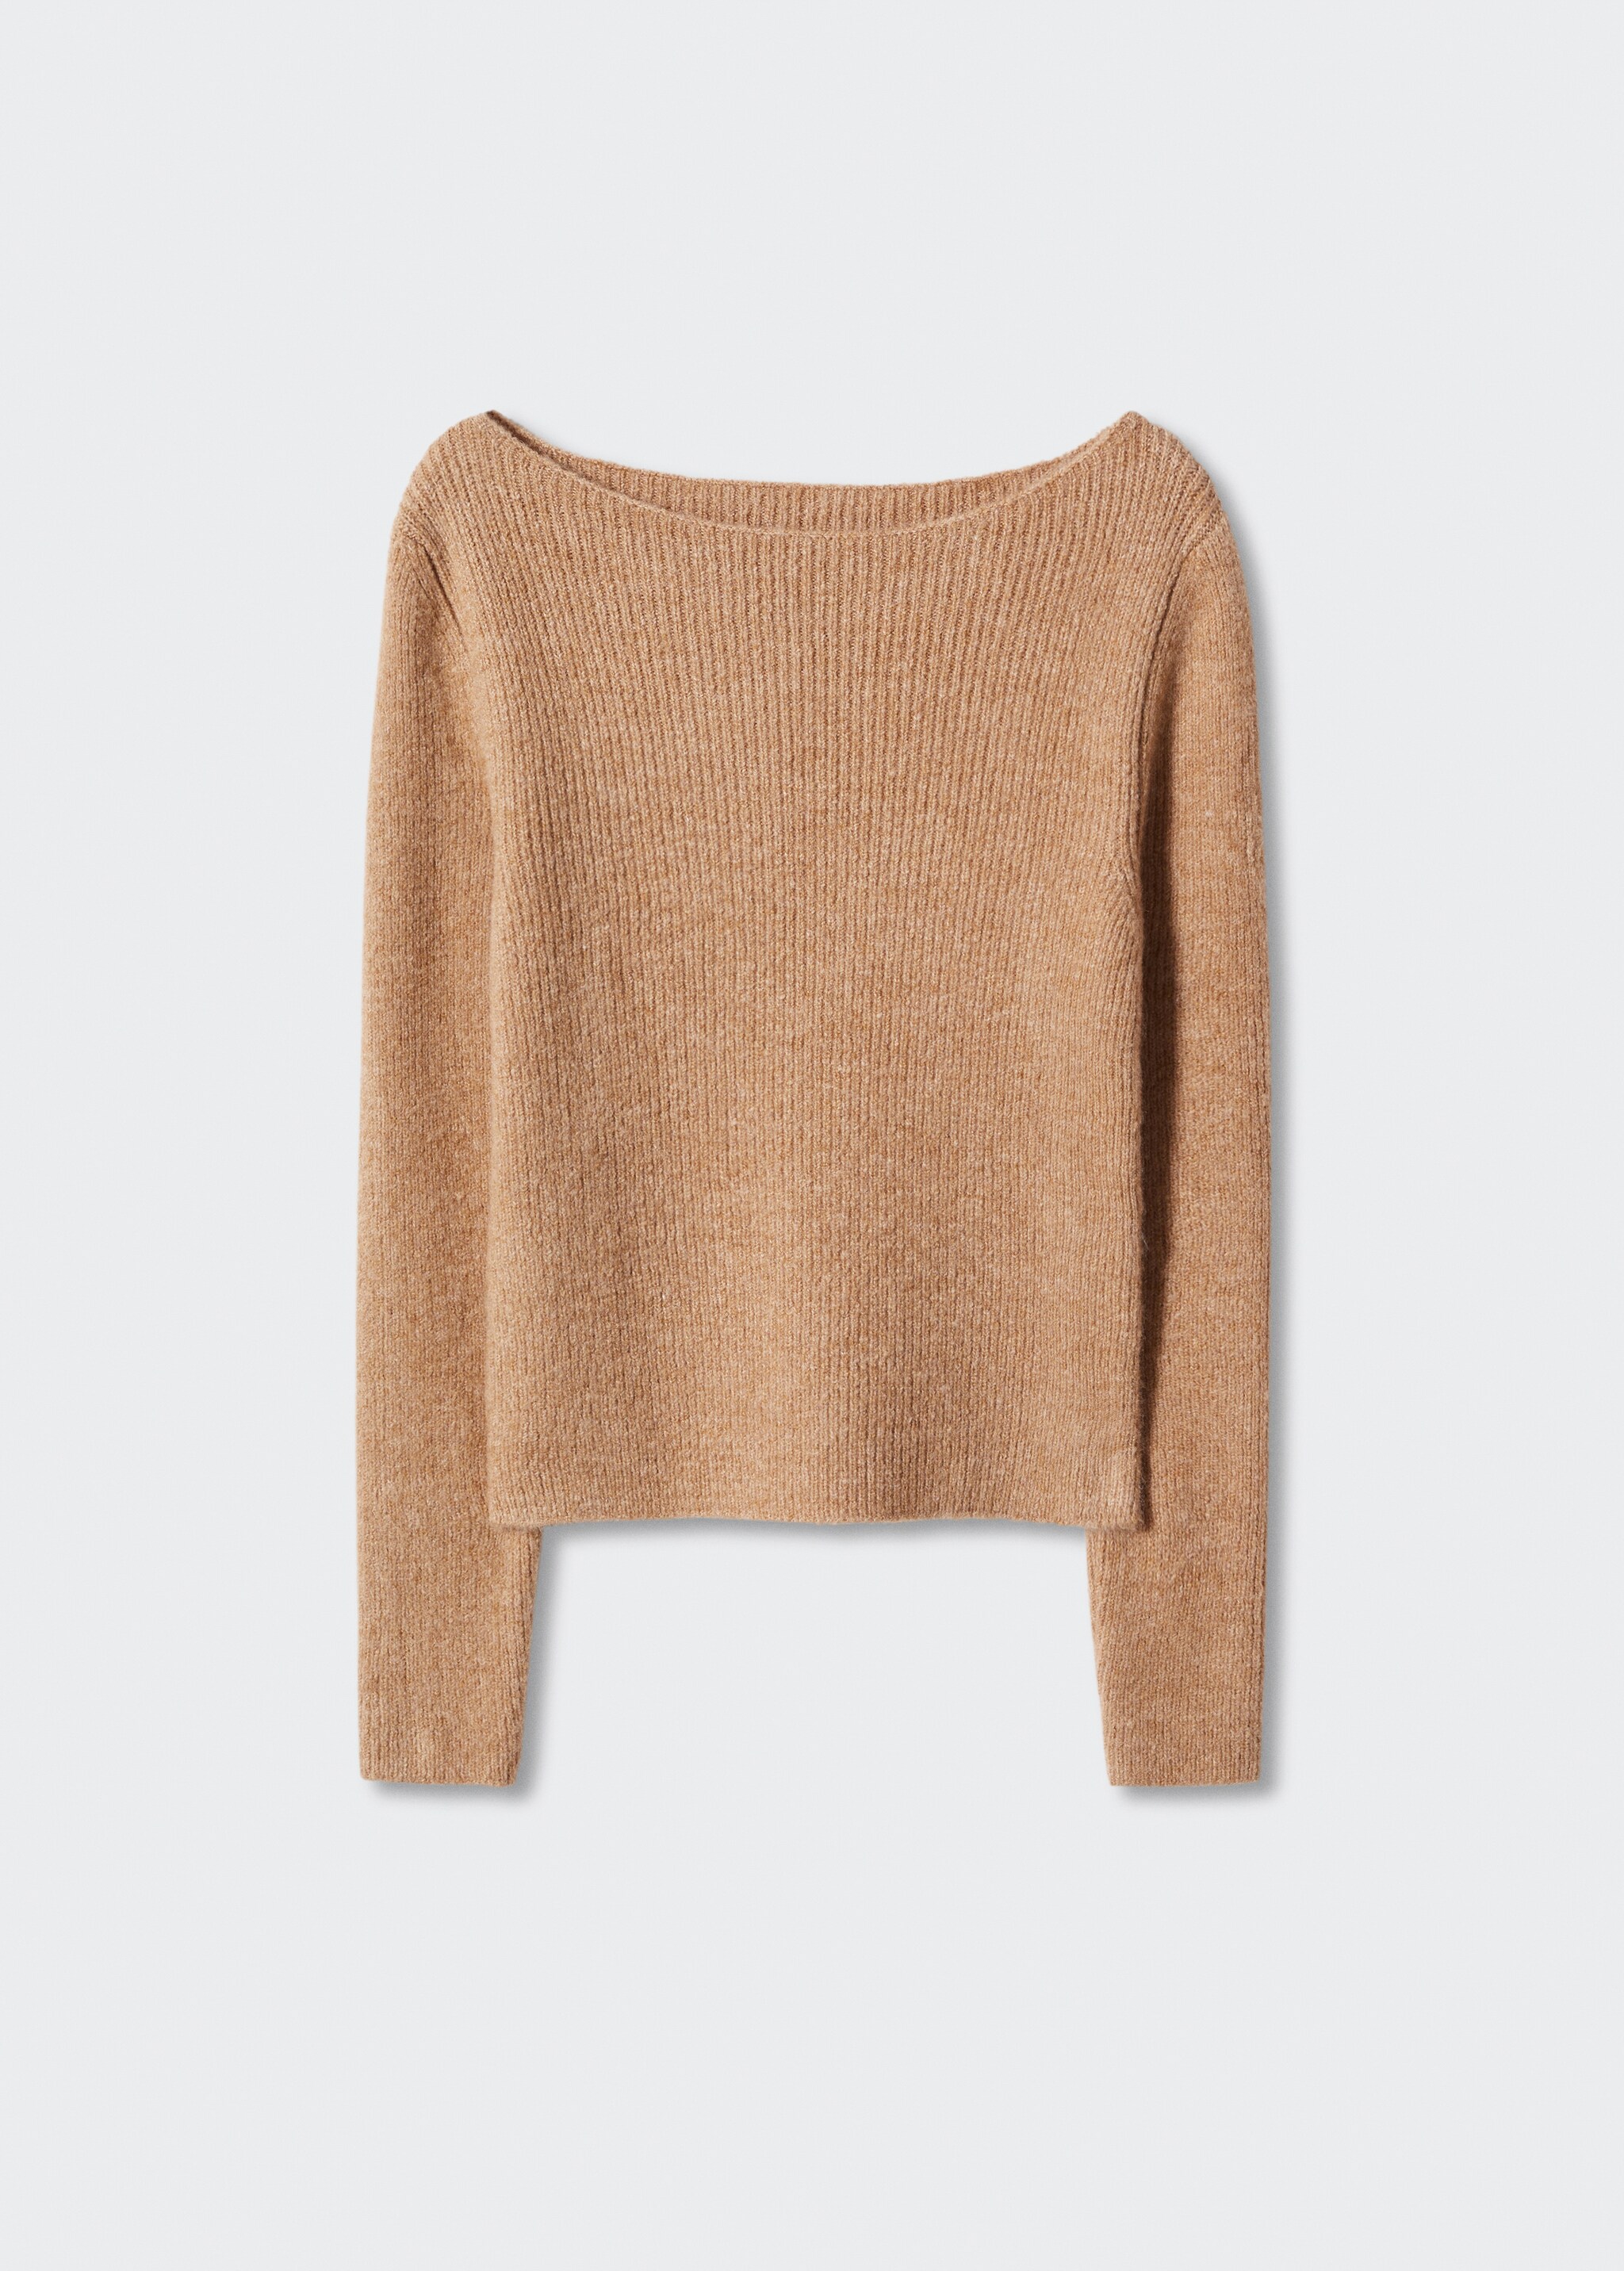 Boat neck ribbed sweater - Article without model